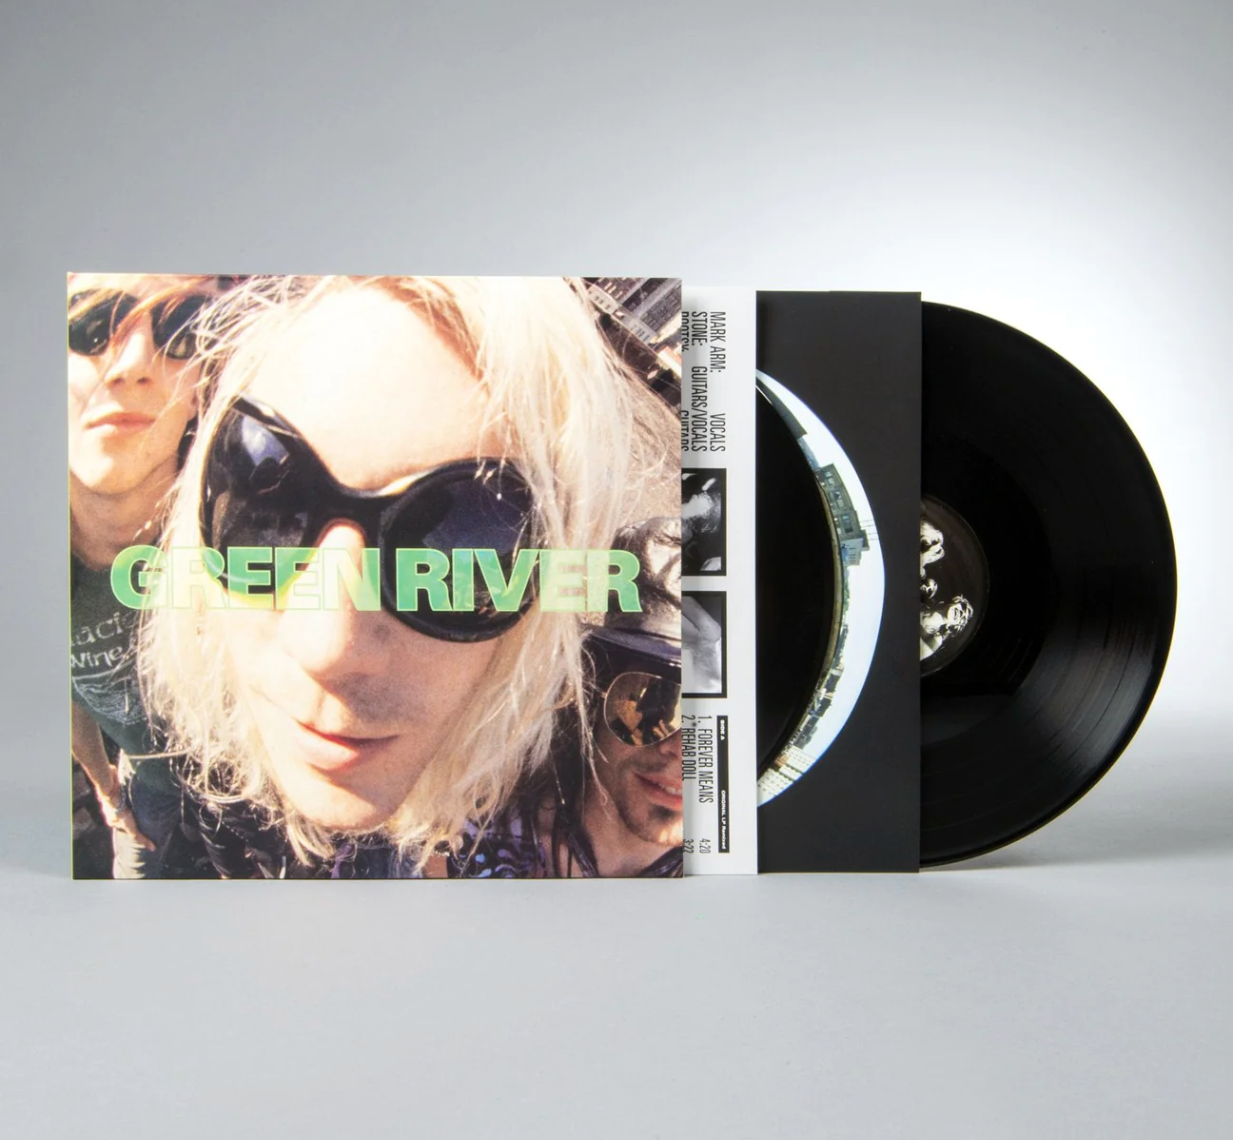 Green River- Rehab Doll (Limited Deluxe Edition)